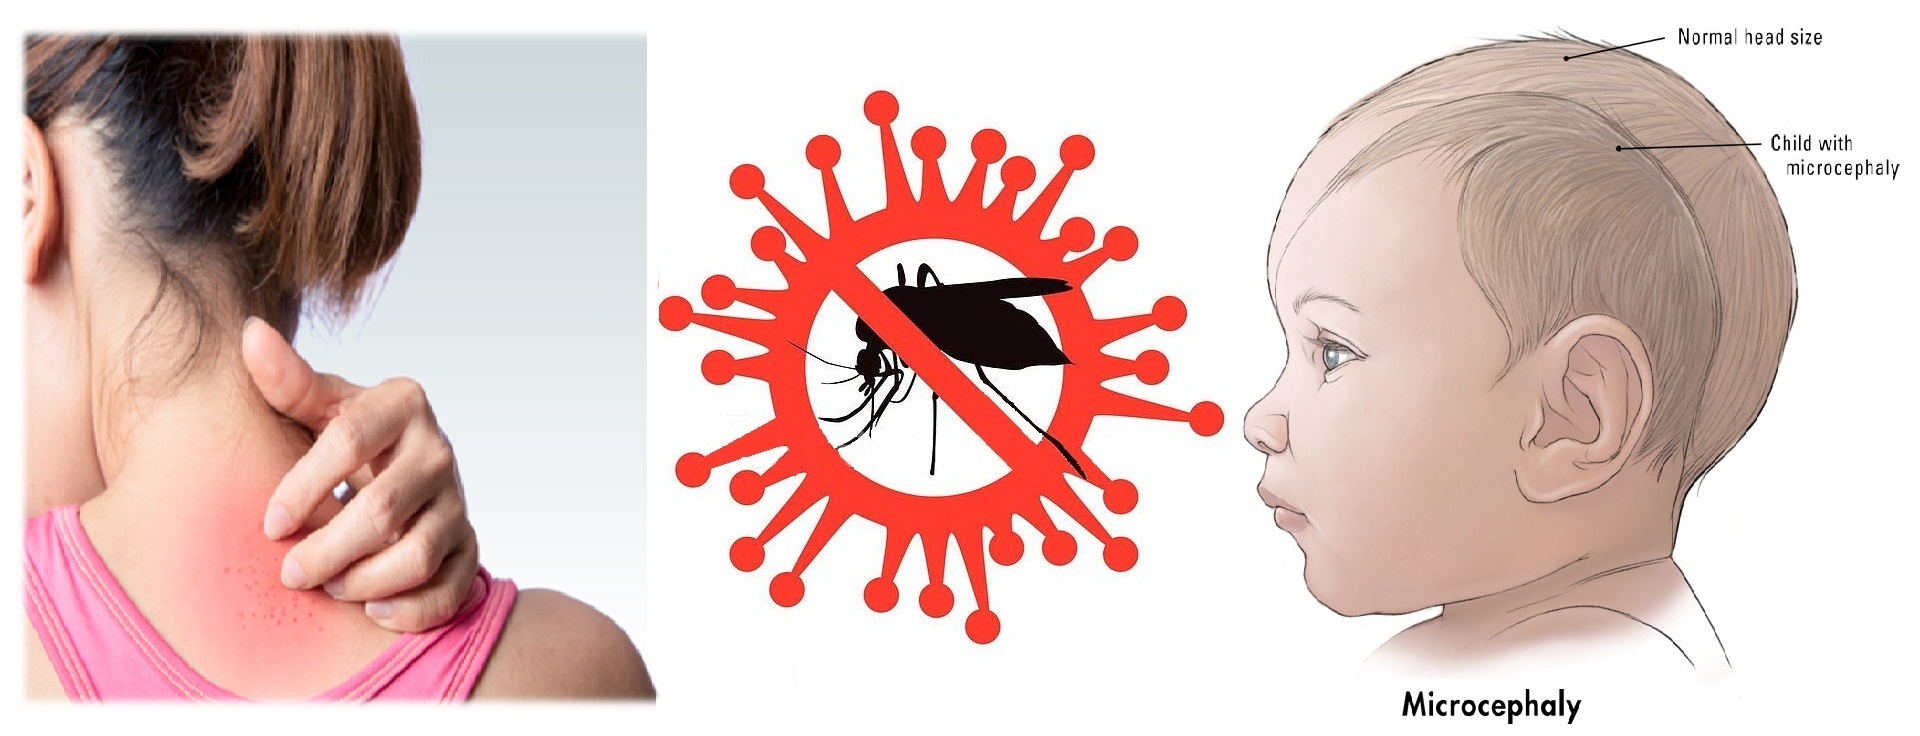 Zika virus Infection: Causes, Sign & Symptoms, Mode of Transmission, Diagnosis, Complication, Treatment and Prevention 5 (2)